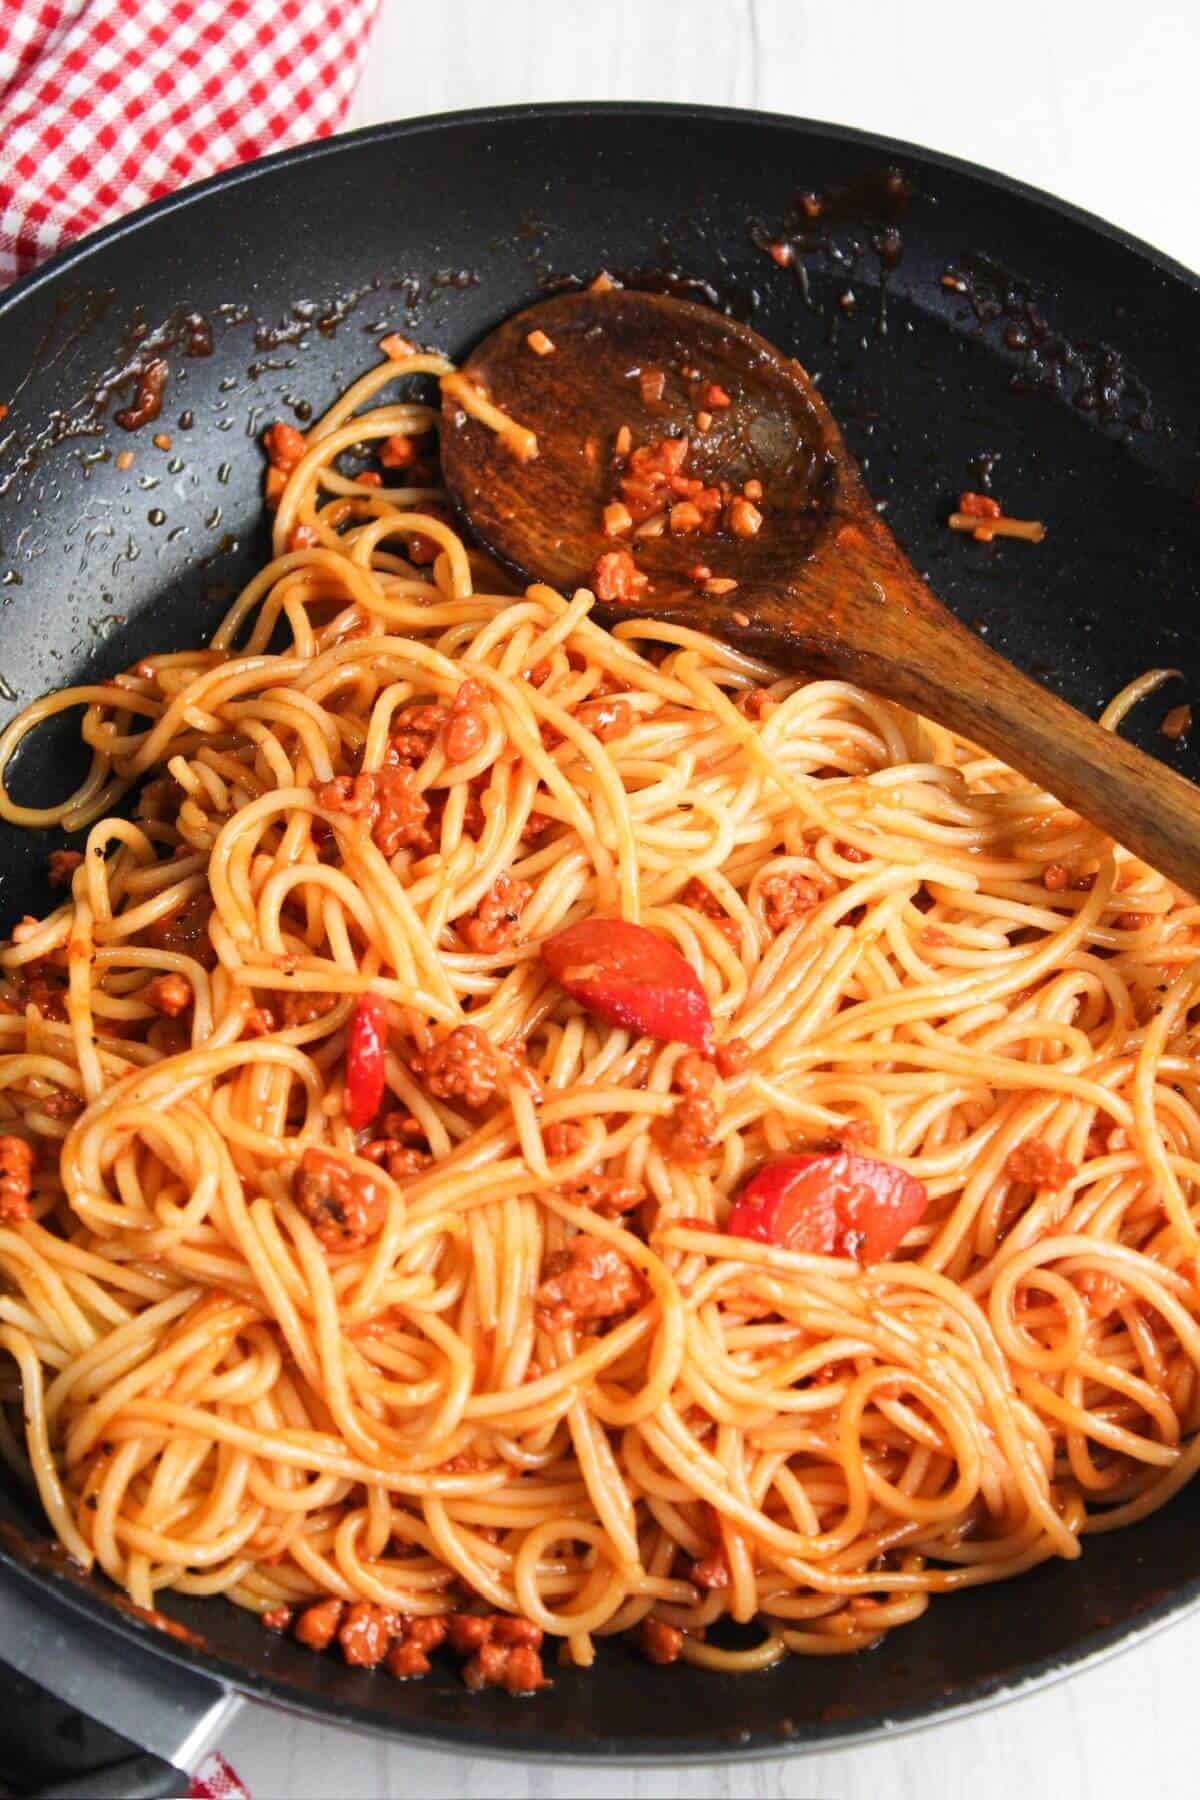 Spaghetti with meat and tomatoes in a frying pan.